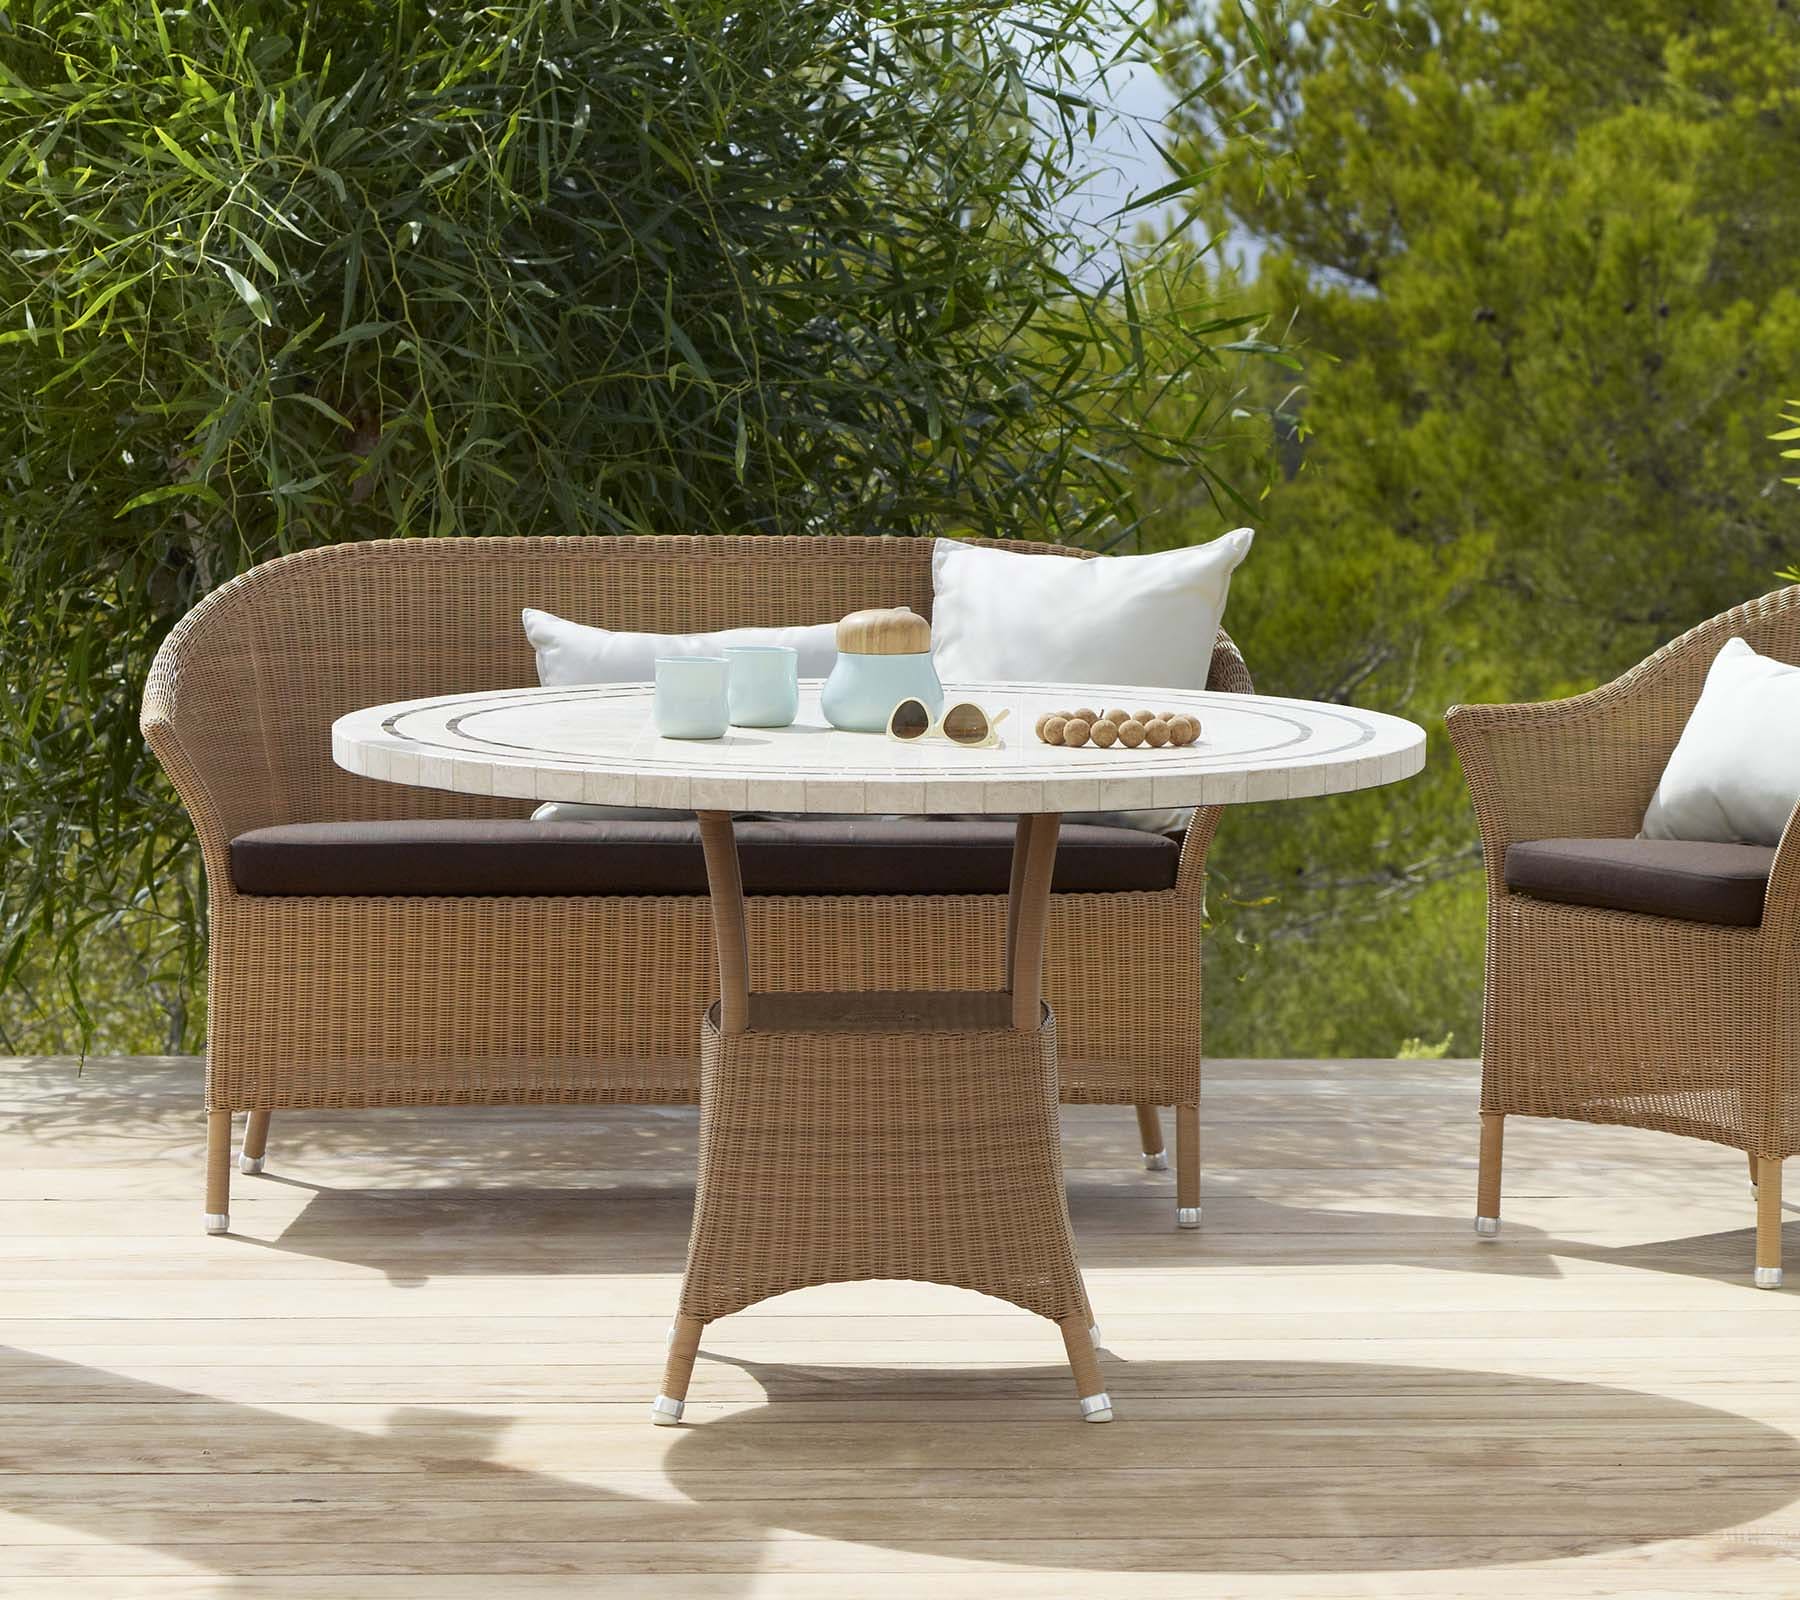 Boxhill's Lansing Outdoor 2-Seater Sofa Natural lifestyle image with Lansing Outdoor Lounge Chair and Lansing Outdoor Round Dining Table at patio